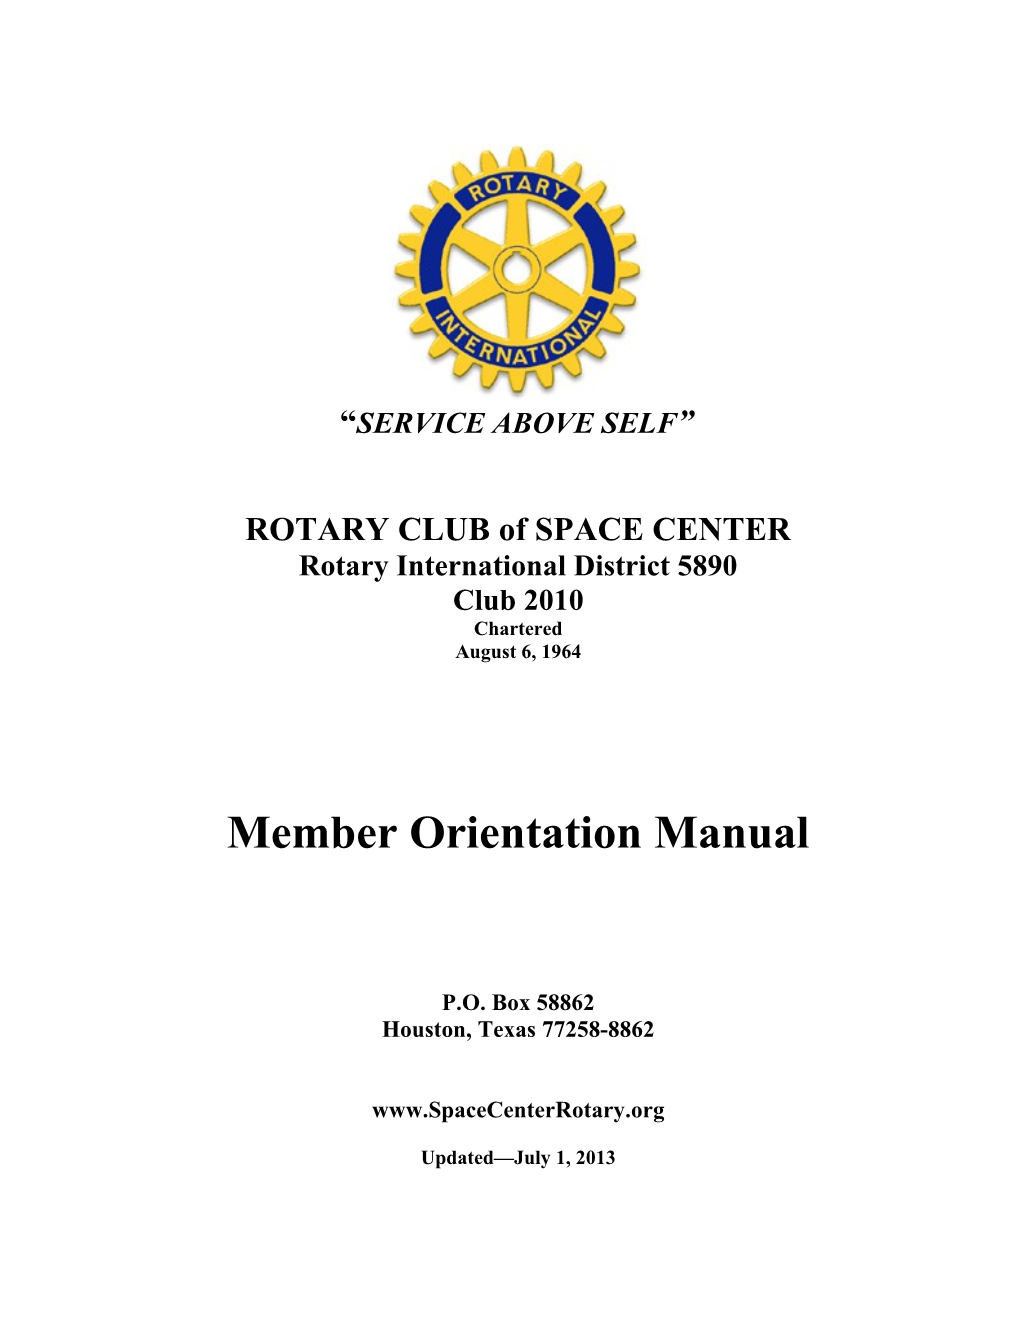 ROTARY CLUB of SPACE CENTER